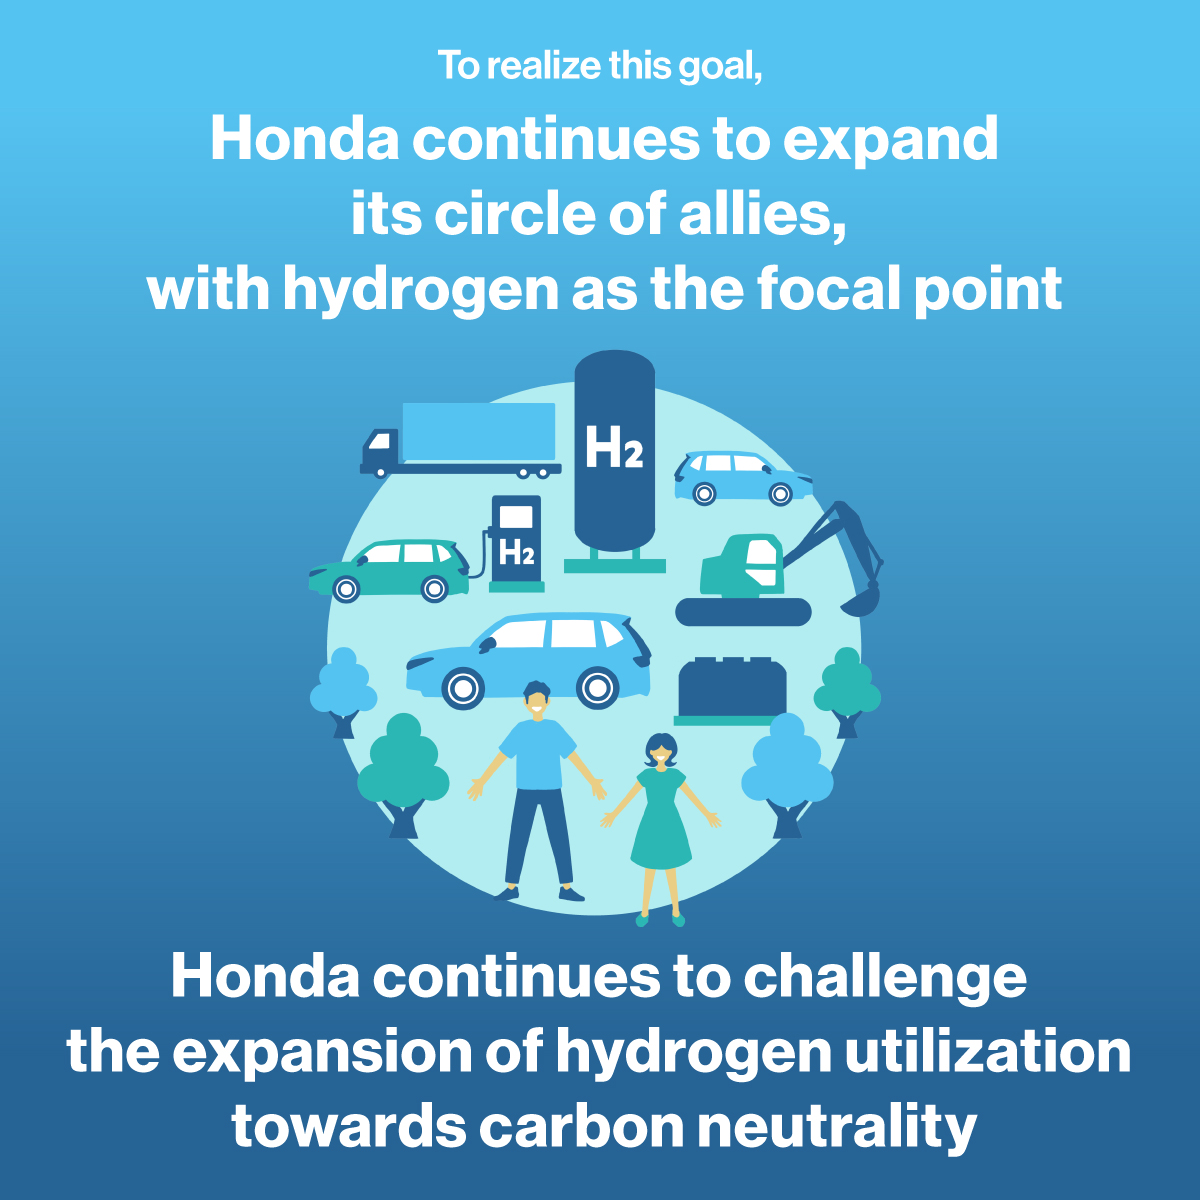 As Honda expands its circle of allies with hydrogen as the focal point, it will continue to challenge the expansion of hydrogen utilization